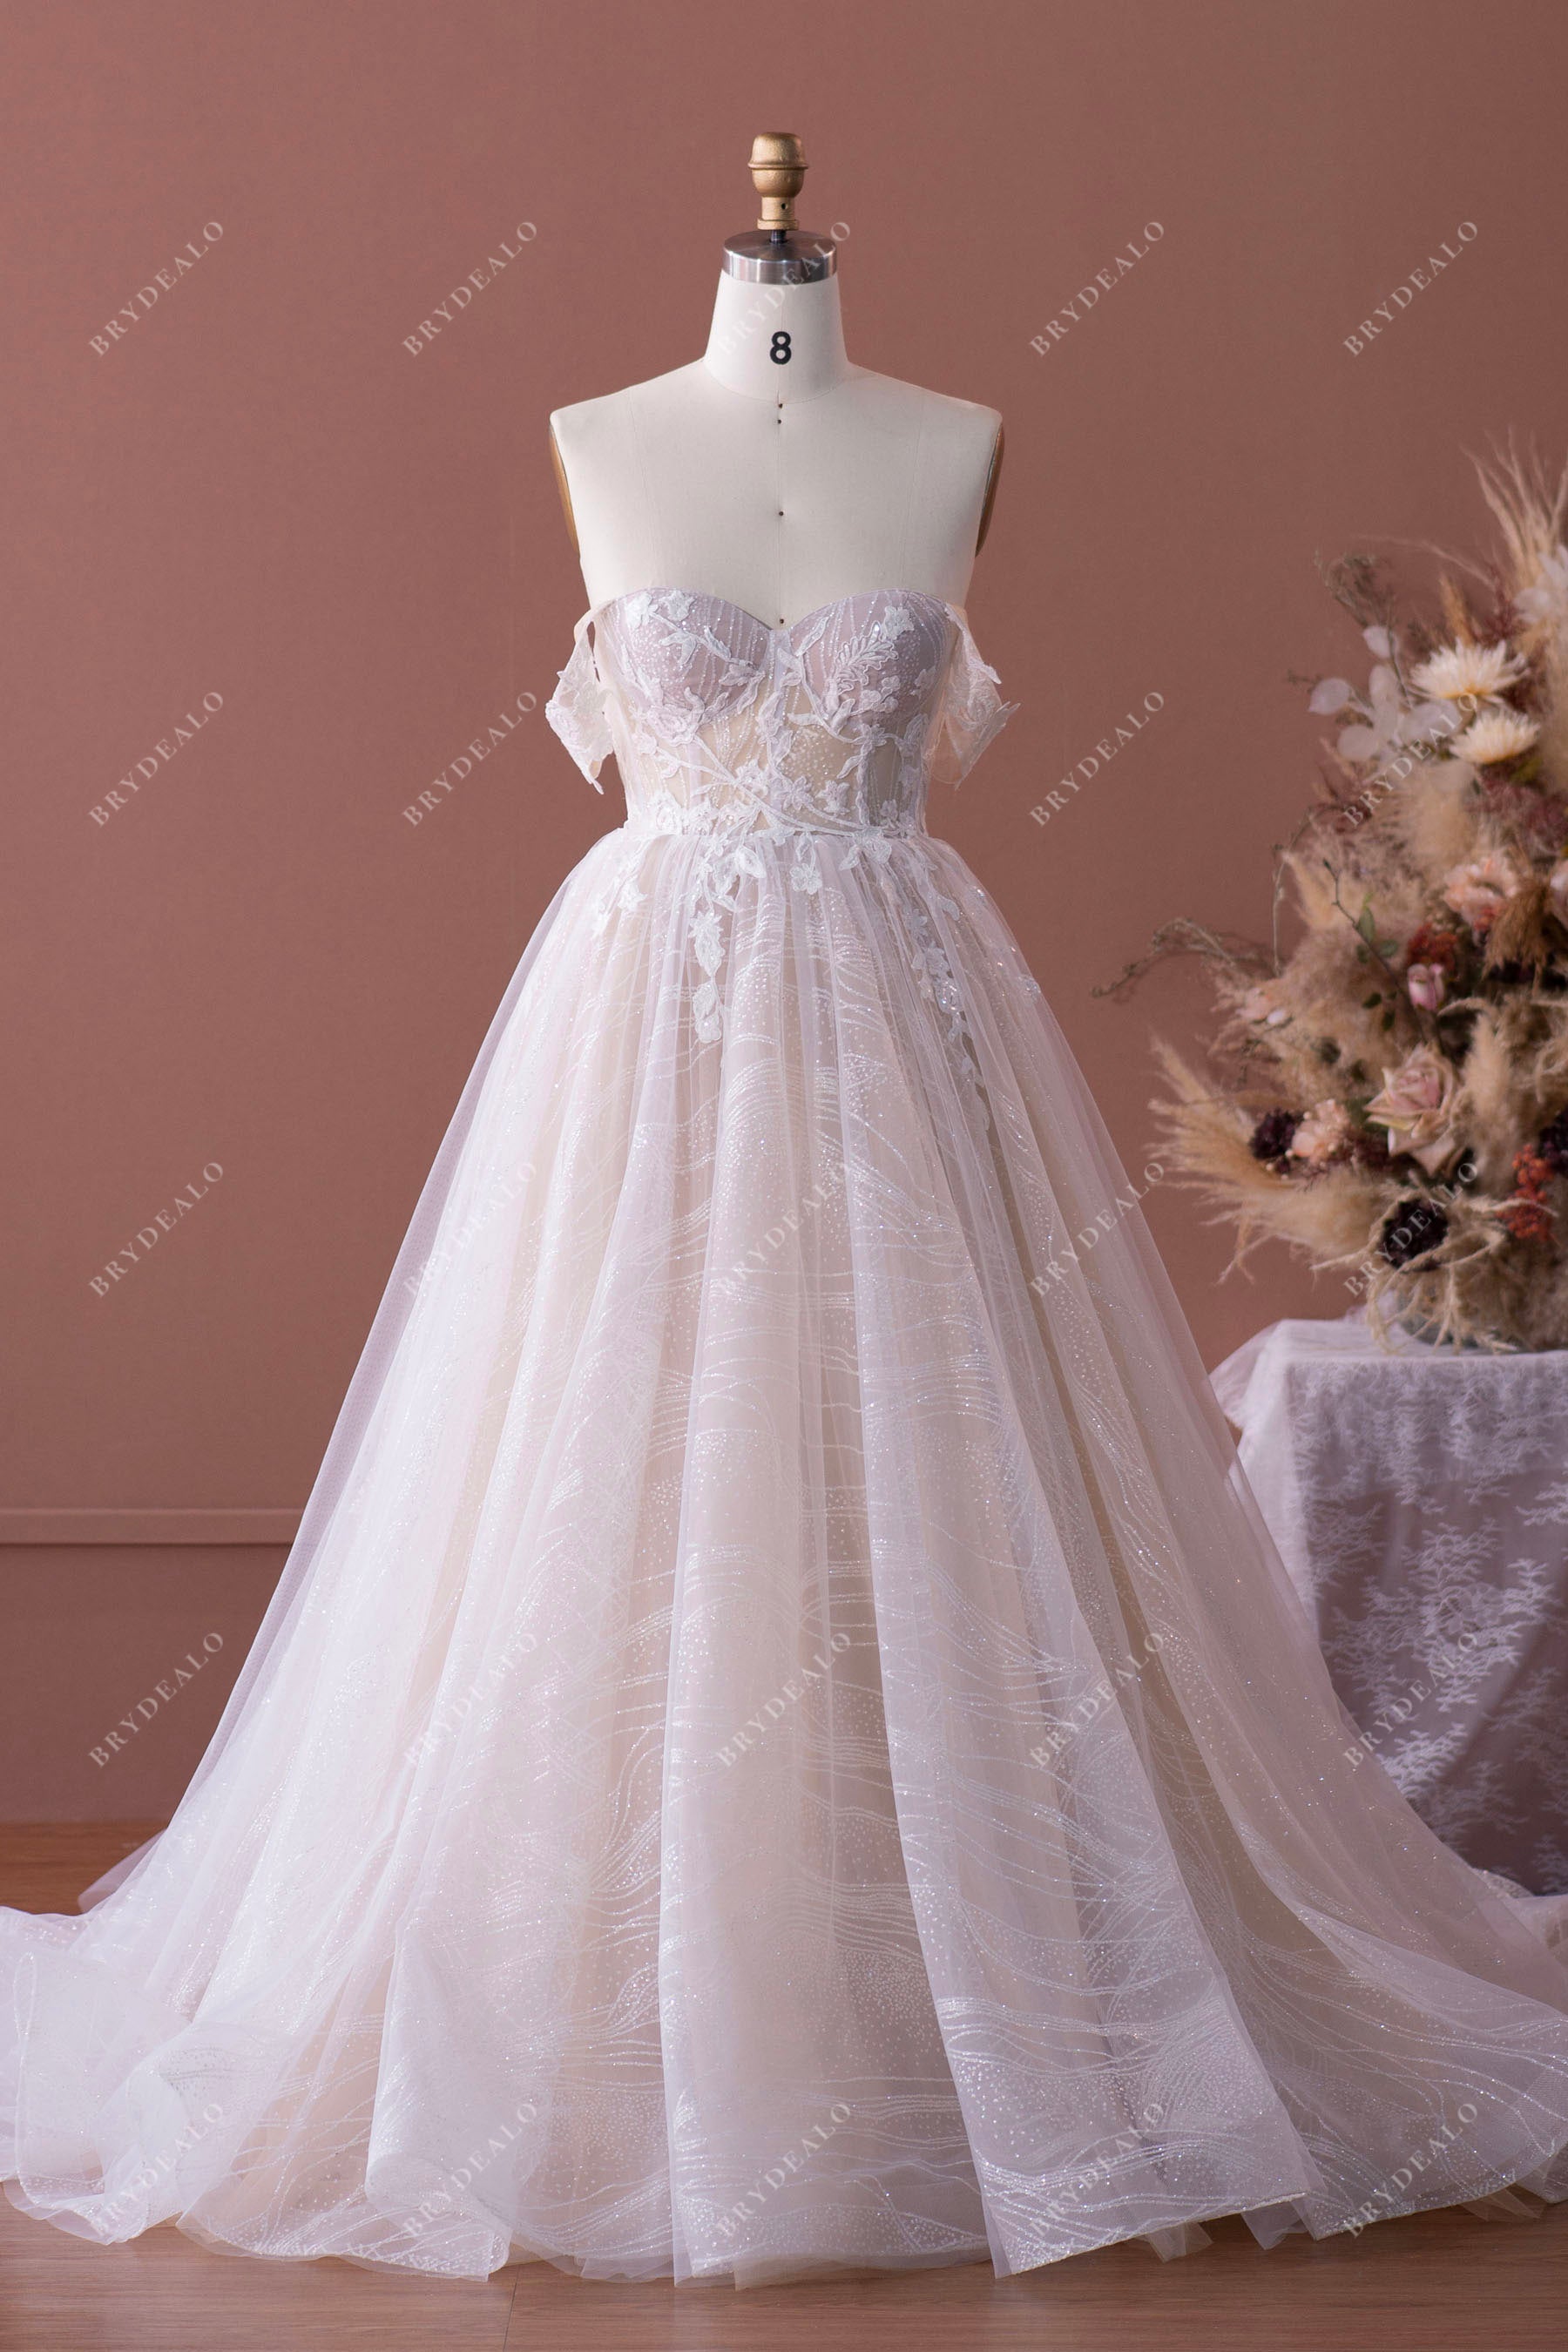 Romantic Lace Champagne Sweetheart Neck Ball Gown Bridal Dress